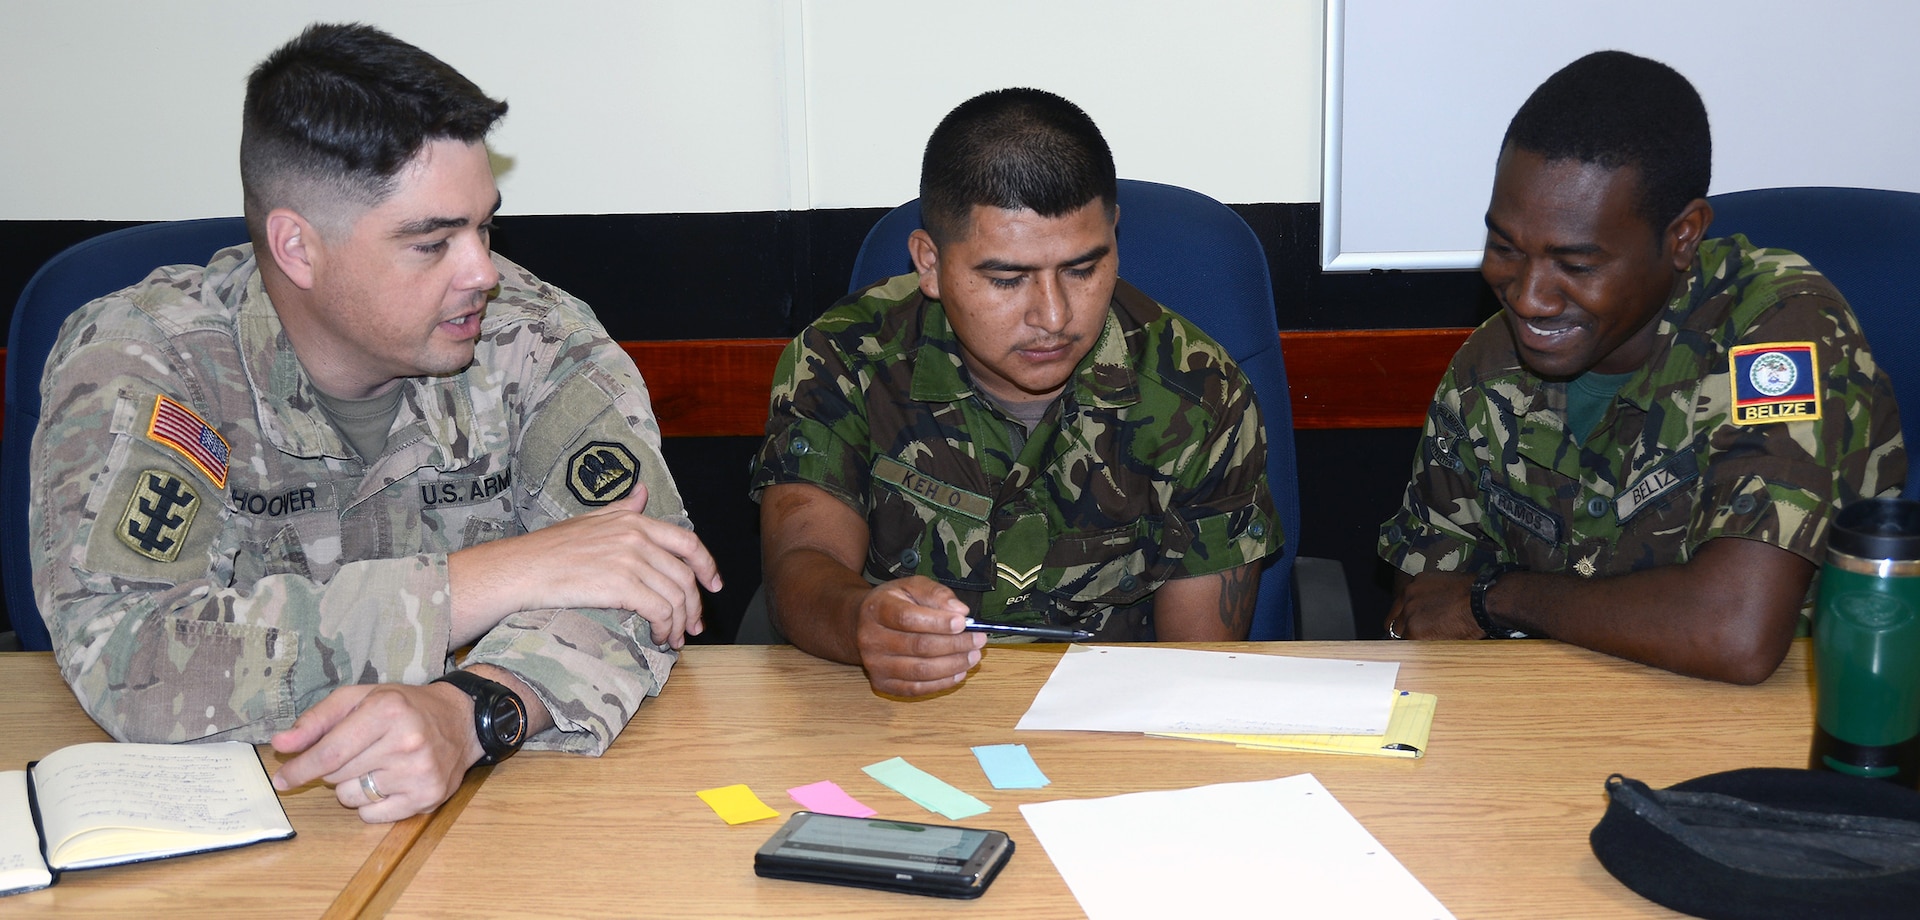 Maj. Terry Vallarautto (left), U.S. Army Louisiana National Guard, participates in a table top exercise with Sgt. Robert Jones (center) and soldiers from the Belize Defence Force during an Energy and Water Conservation Policy Subject Matter Exchange in Belize City May 8.